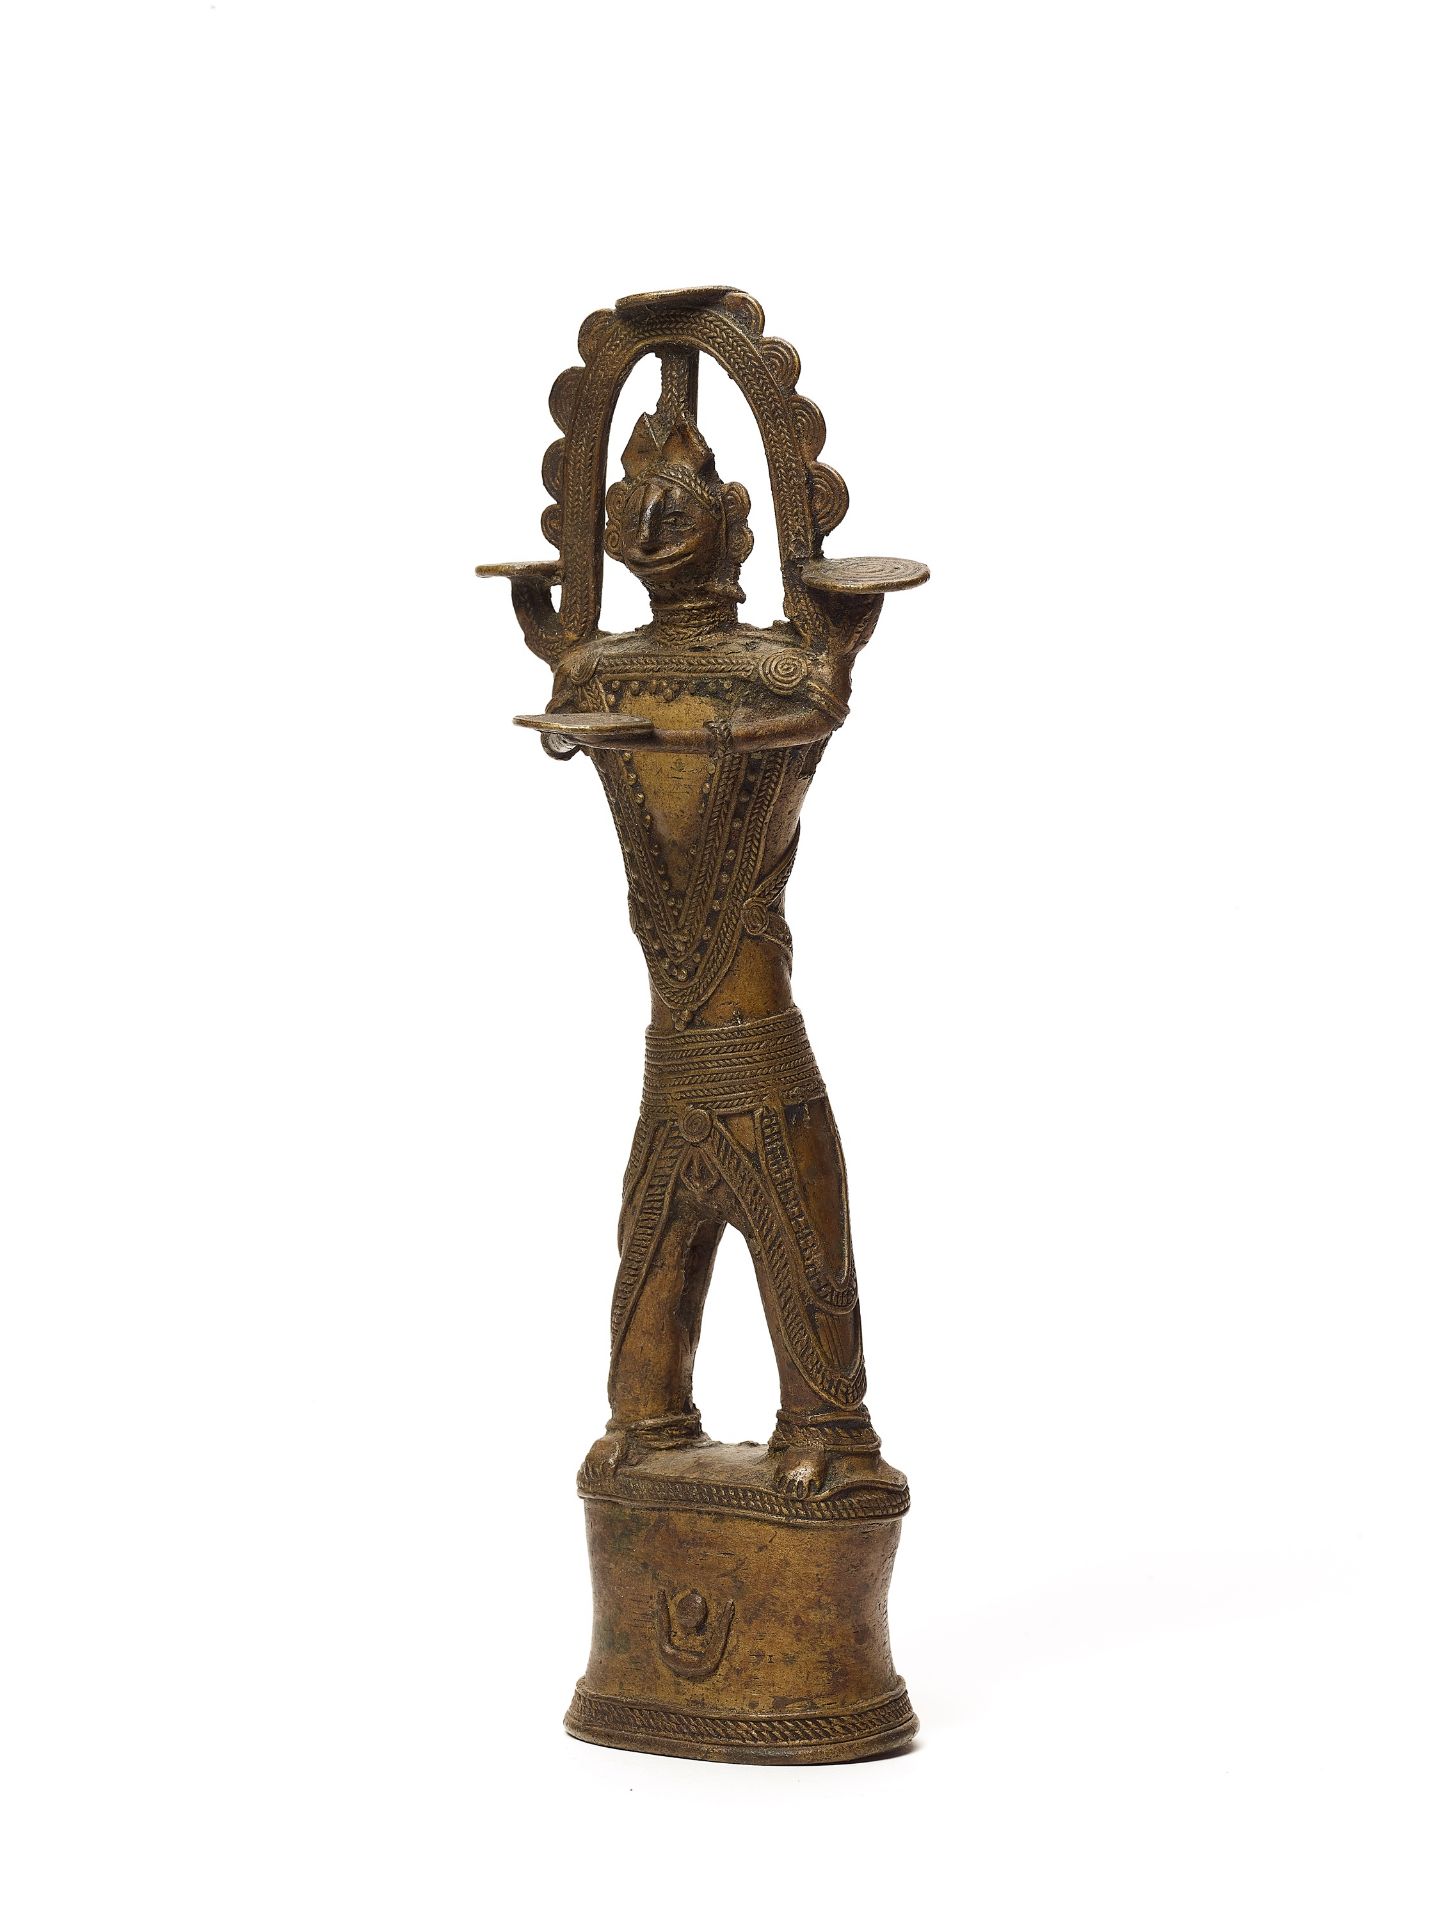 A BASTAR BRONZE OF A FEMALE DEITY HOLDING A VESSEL - Image 2 of 4